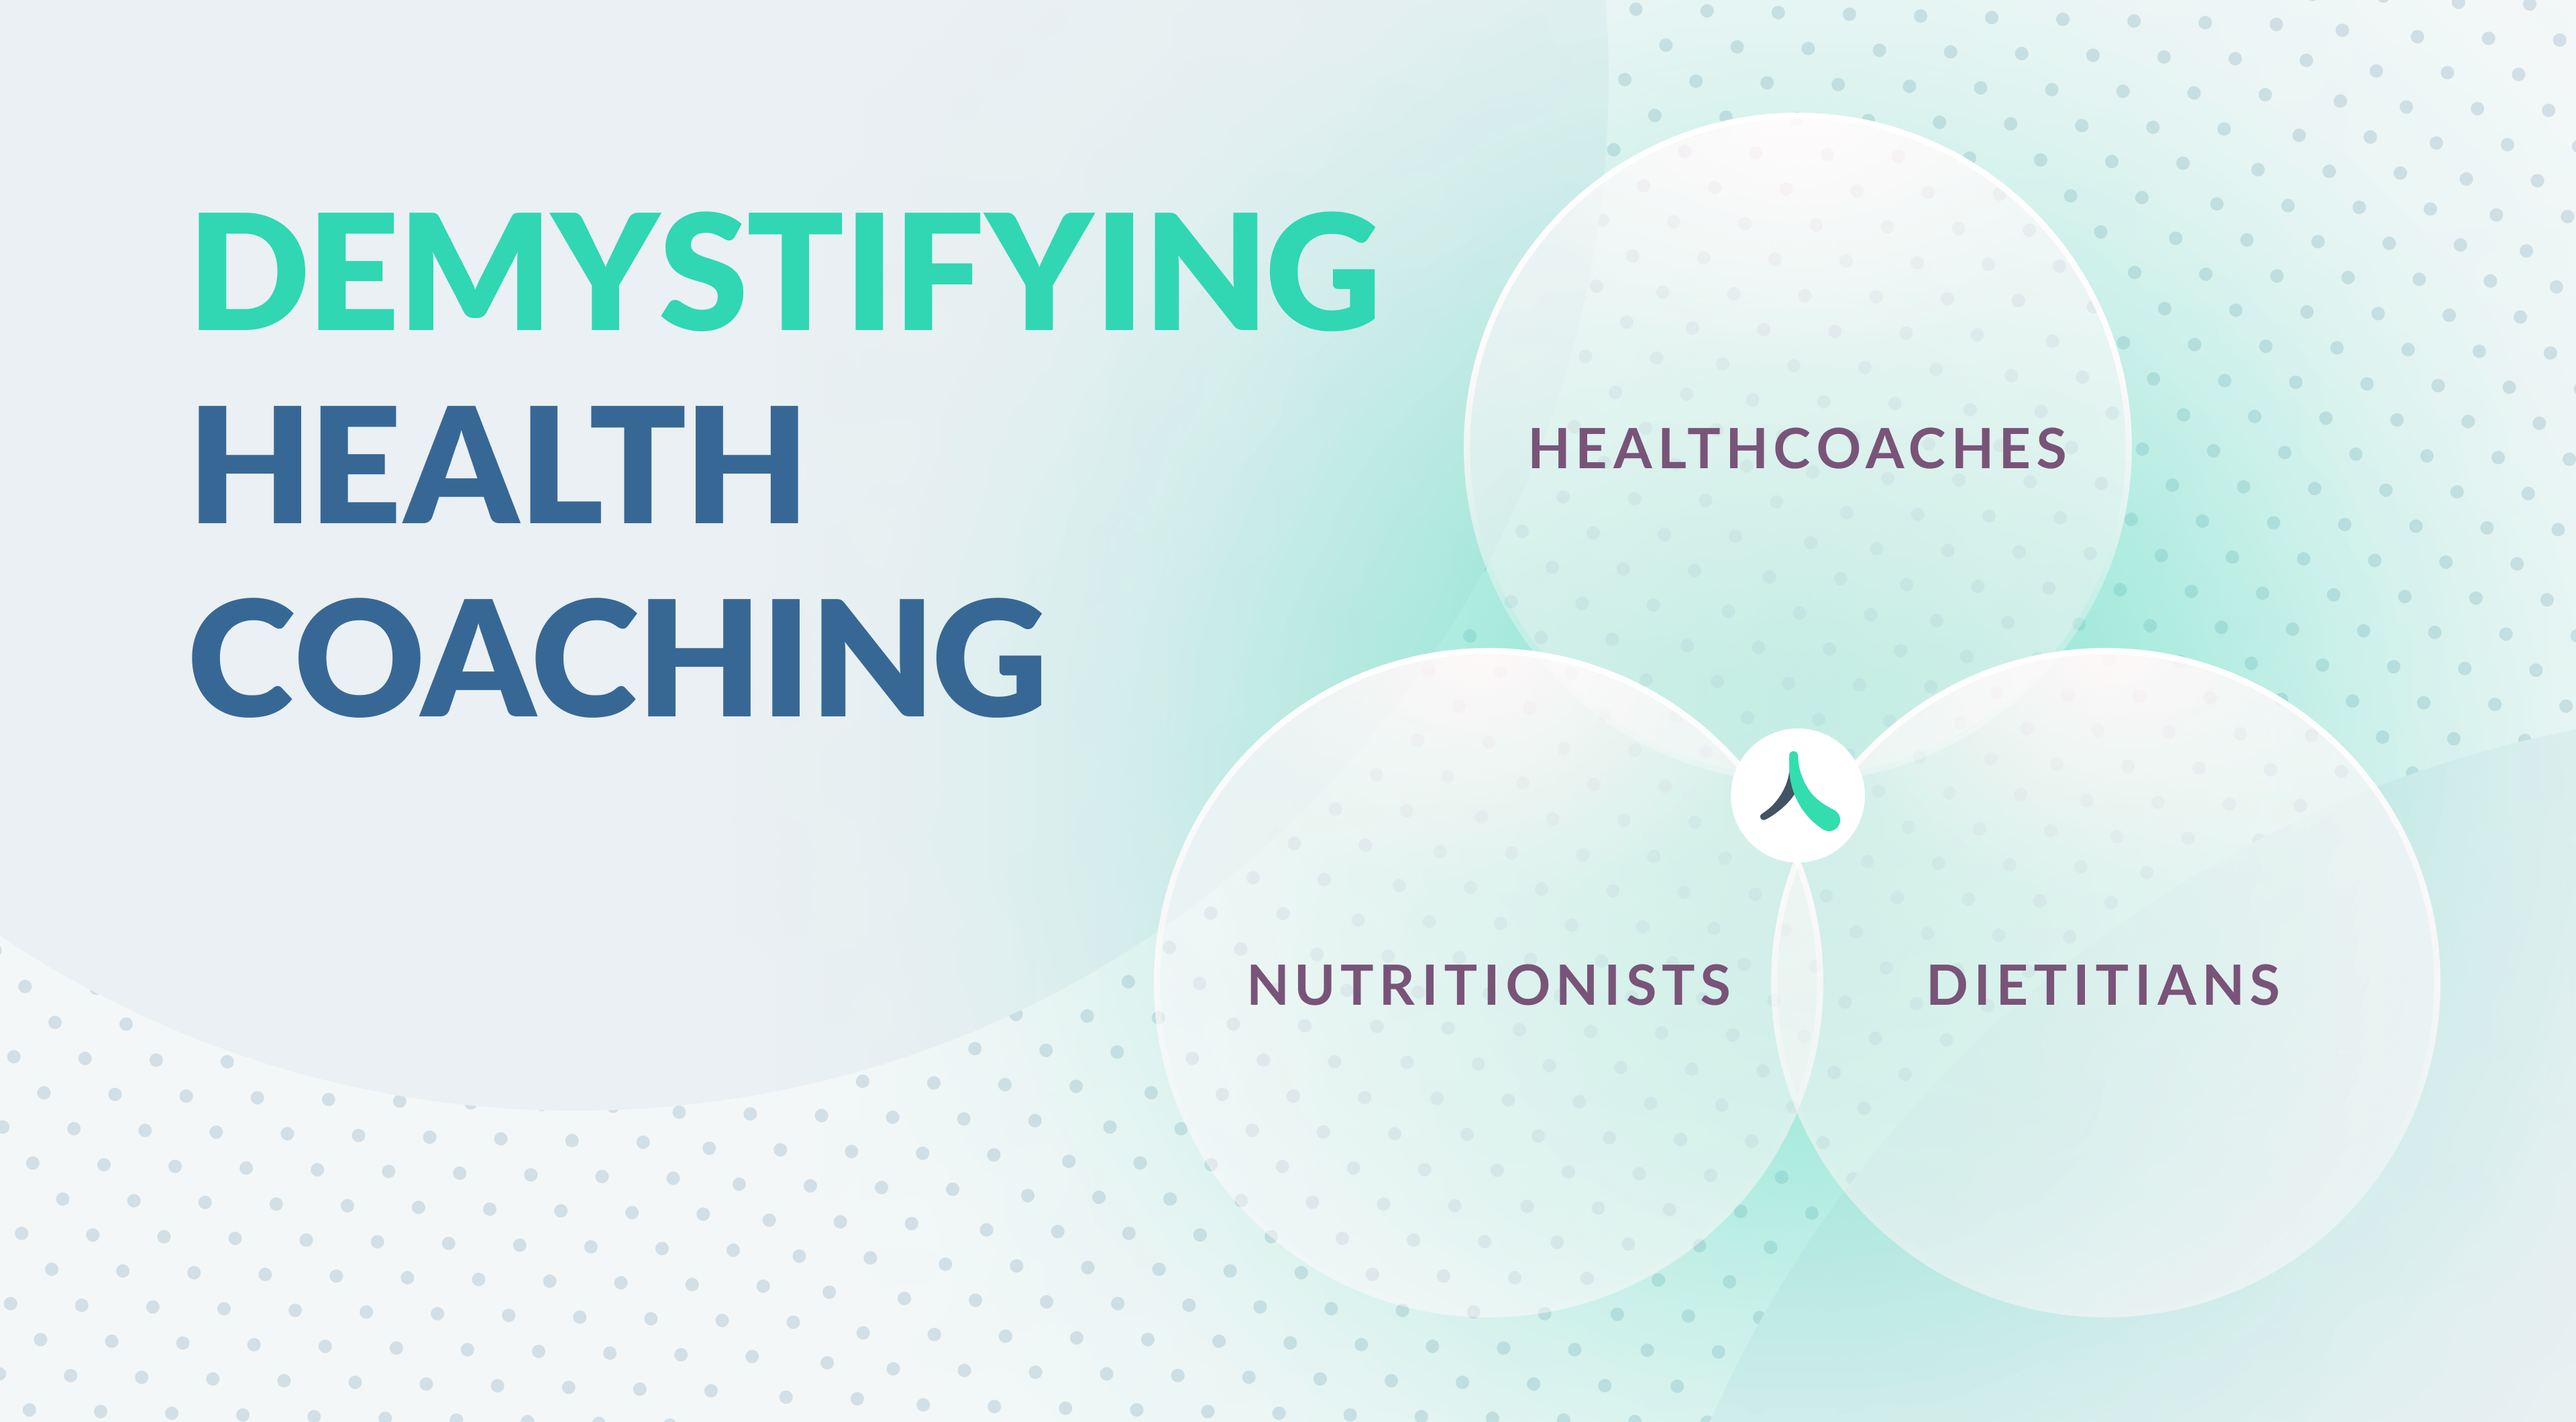 Demystifying Health Coaching: Unpacking the Differences Between Dieticians, Nutritionists & Health Coaches